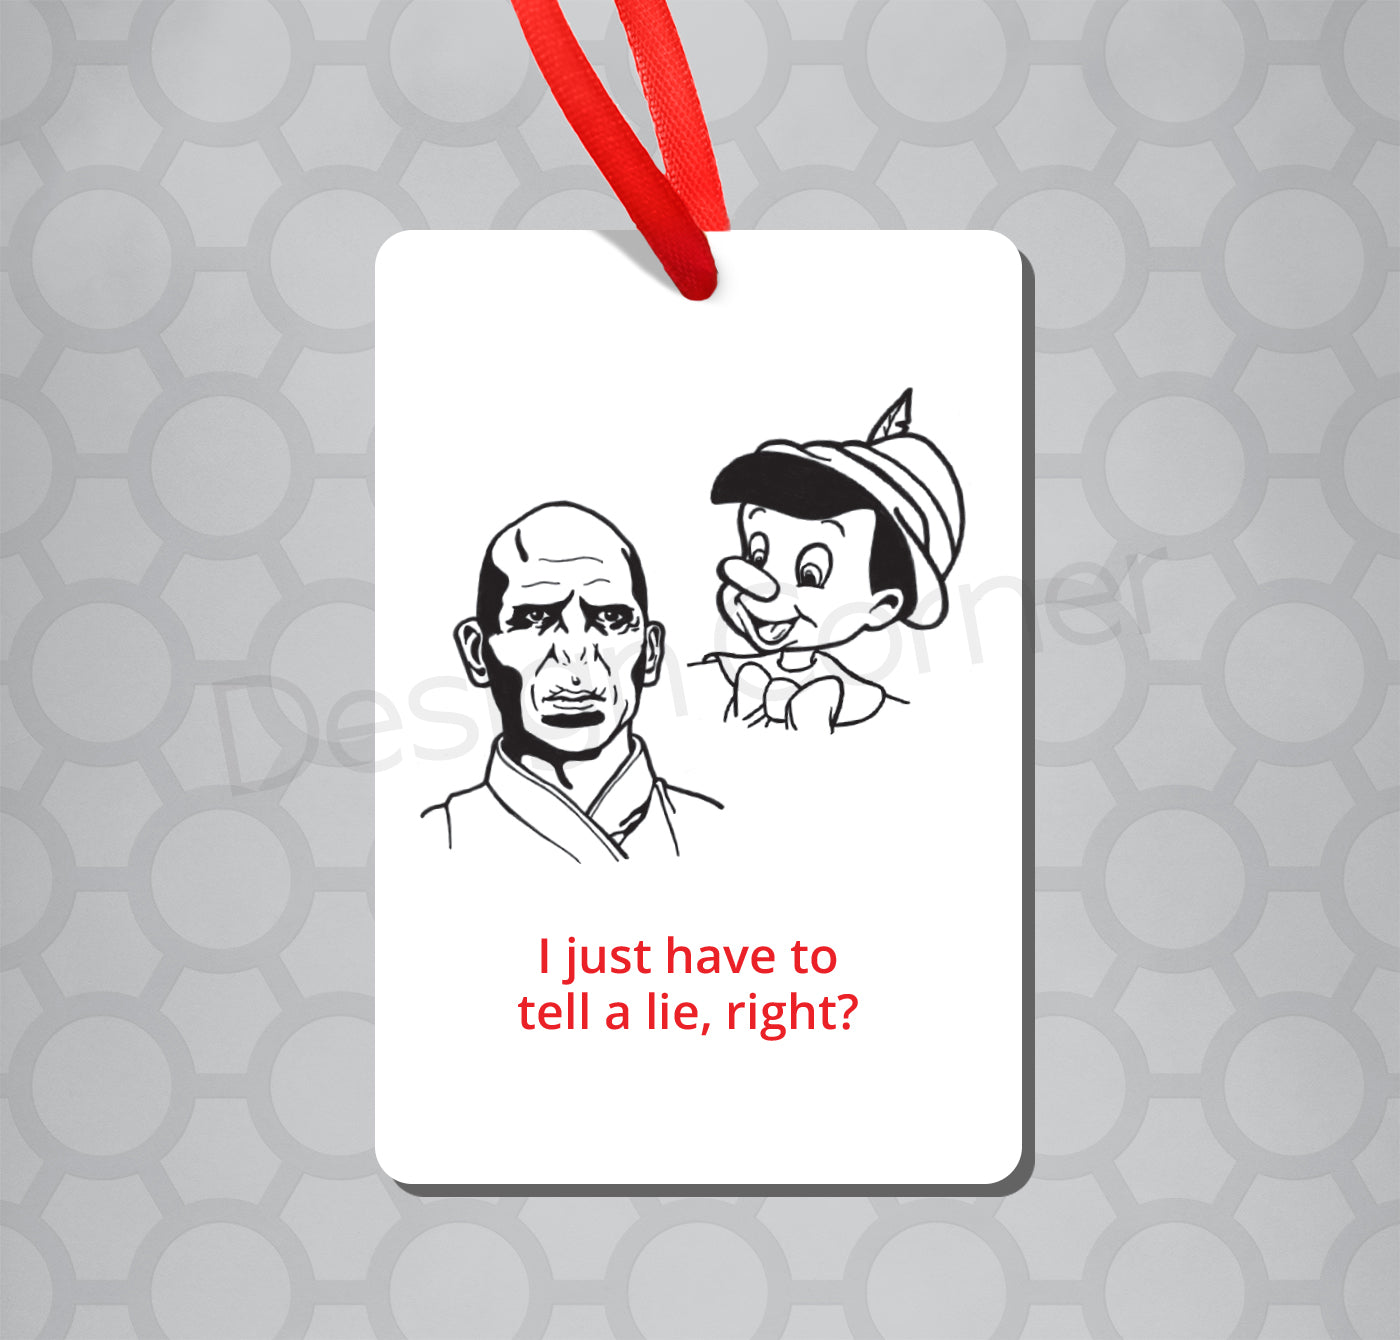 Illustration of Voldemort and Pinnochio on magnet ornament with caption ""I just have to tell a lie, right?"